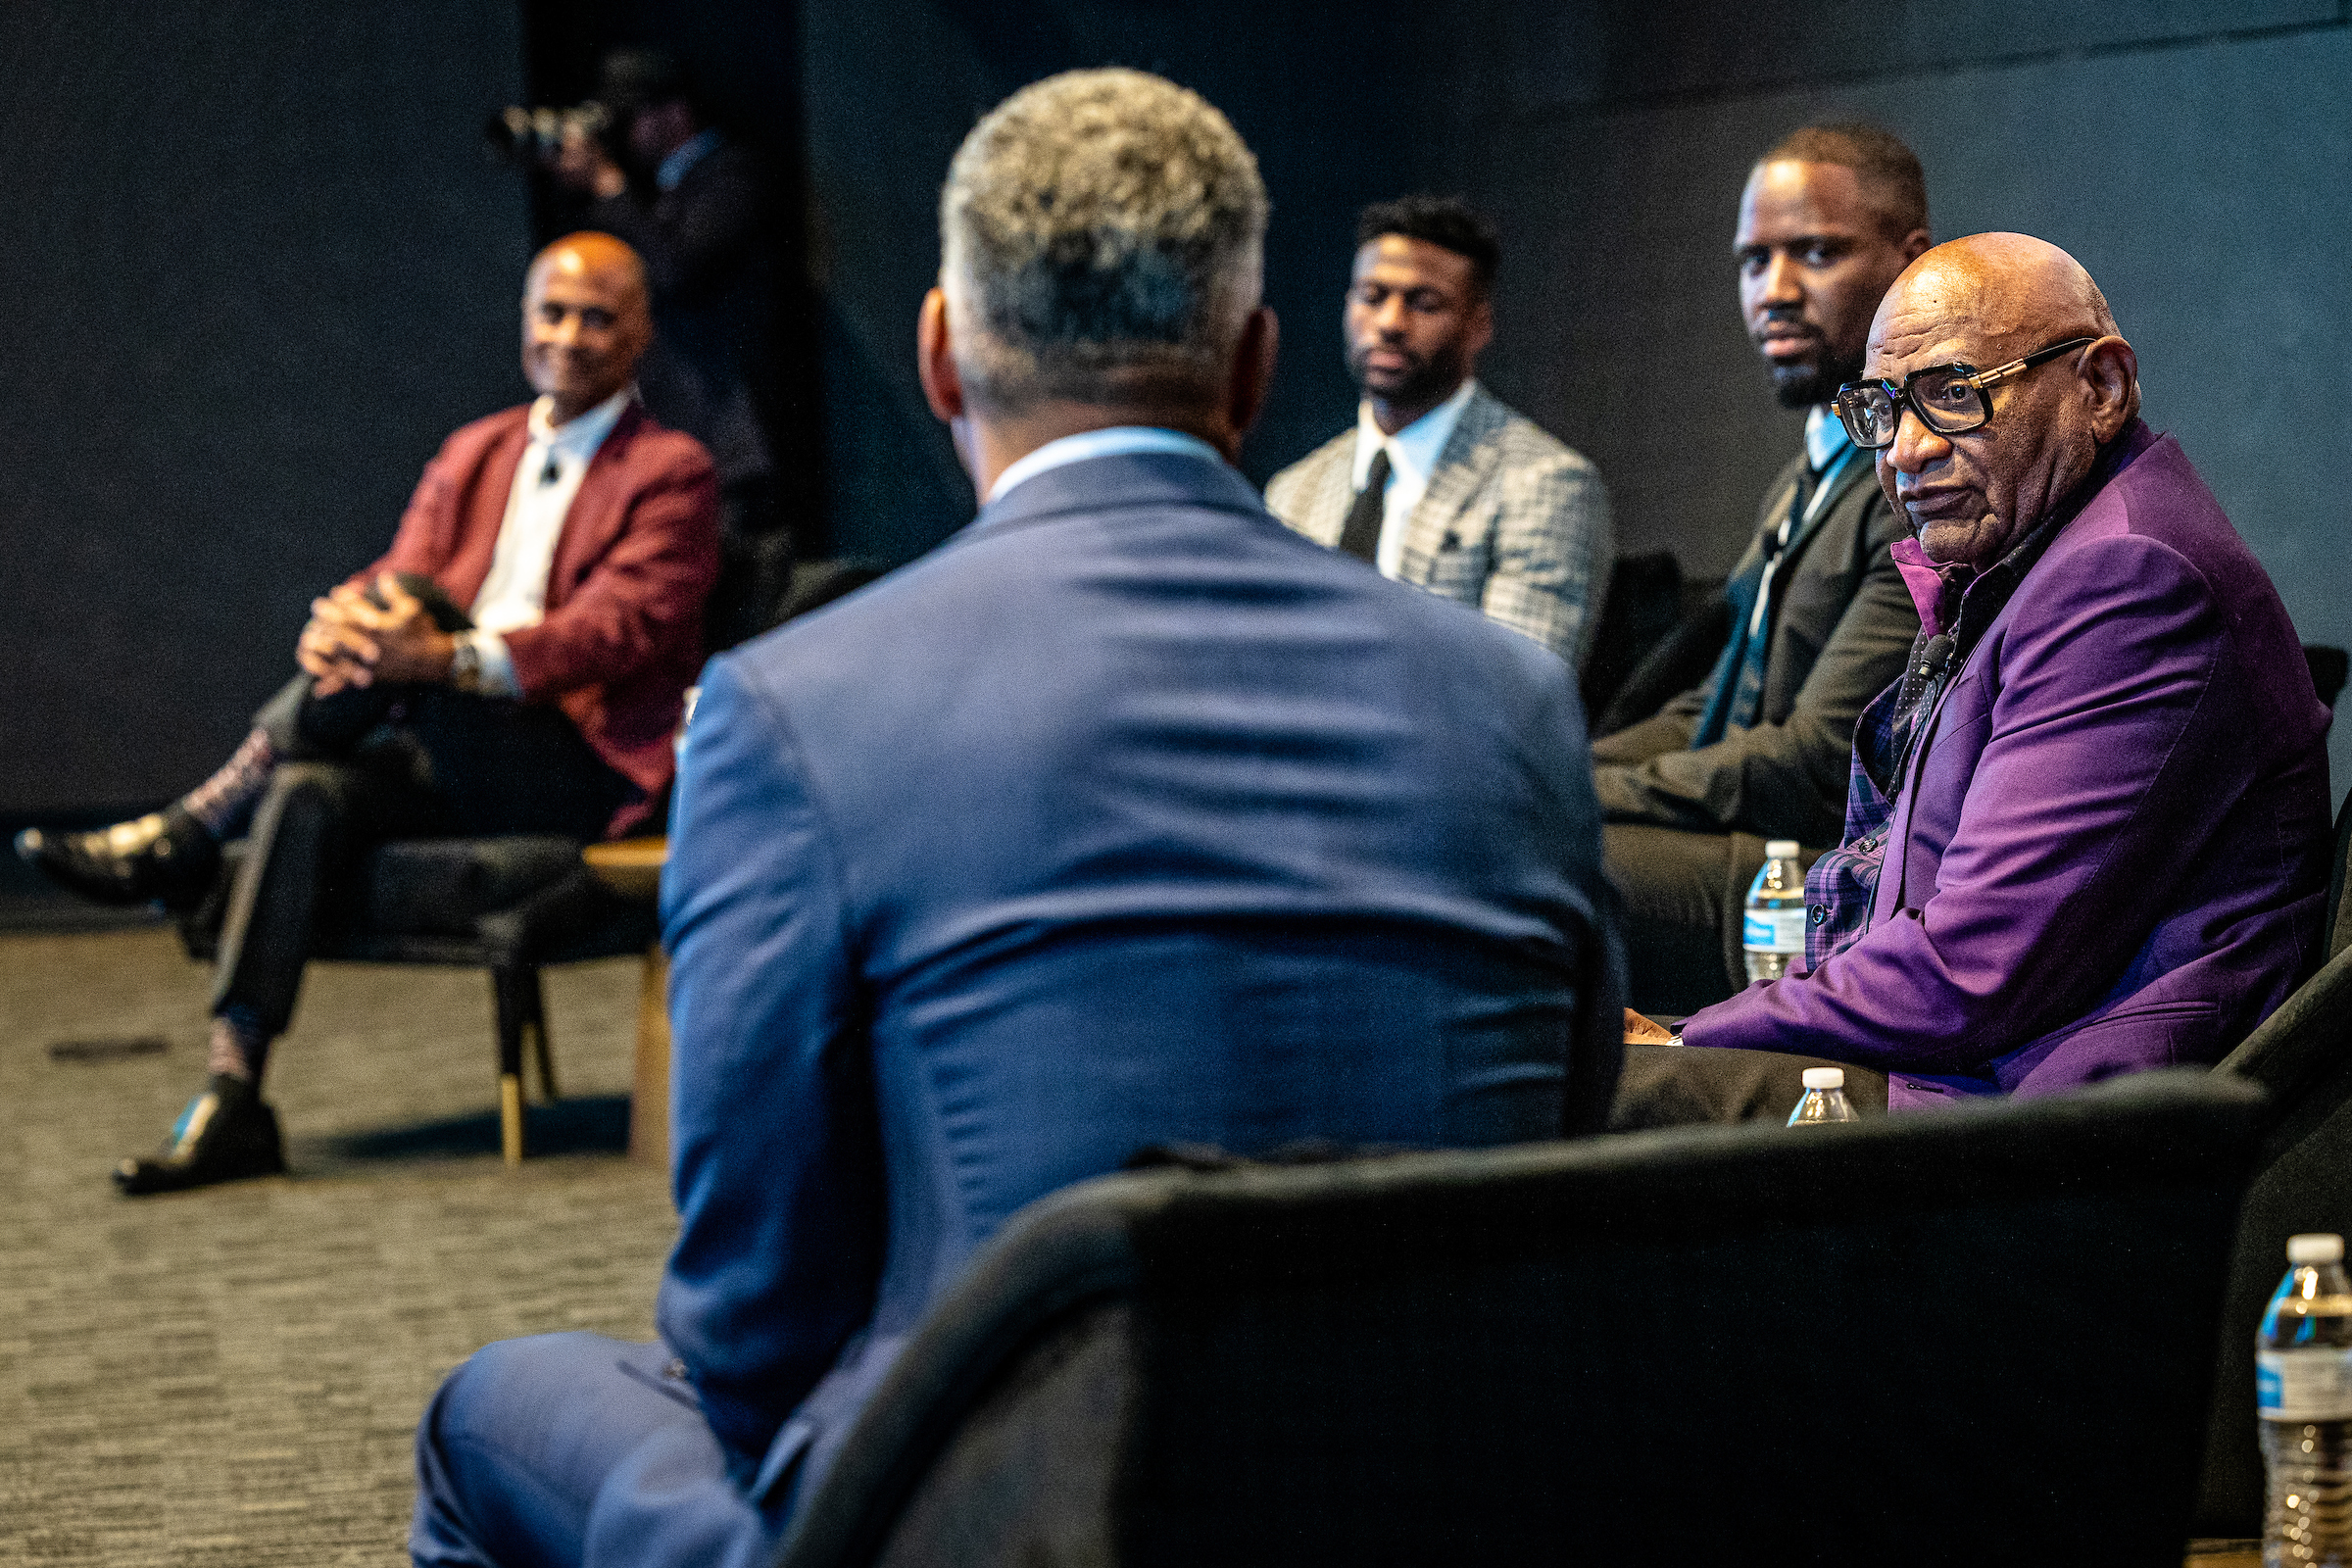 Group of Black men on stage for panel discussion